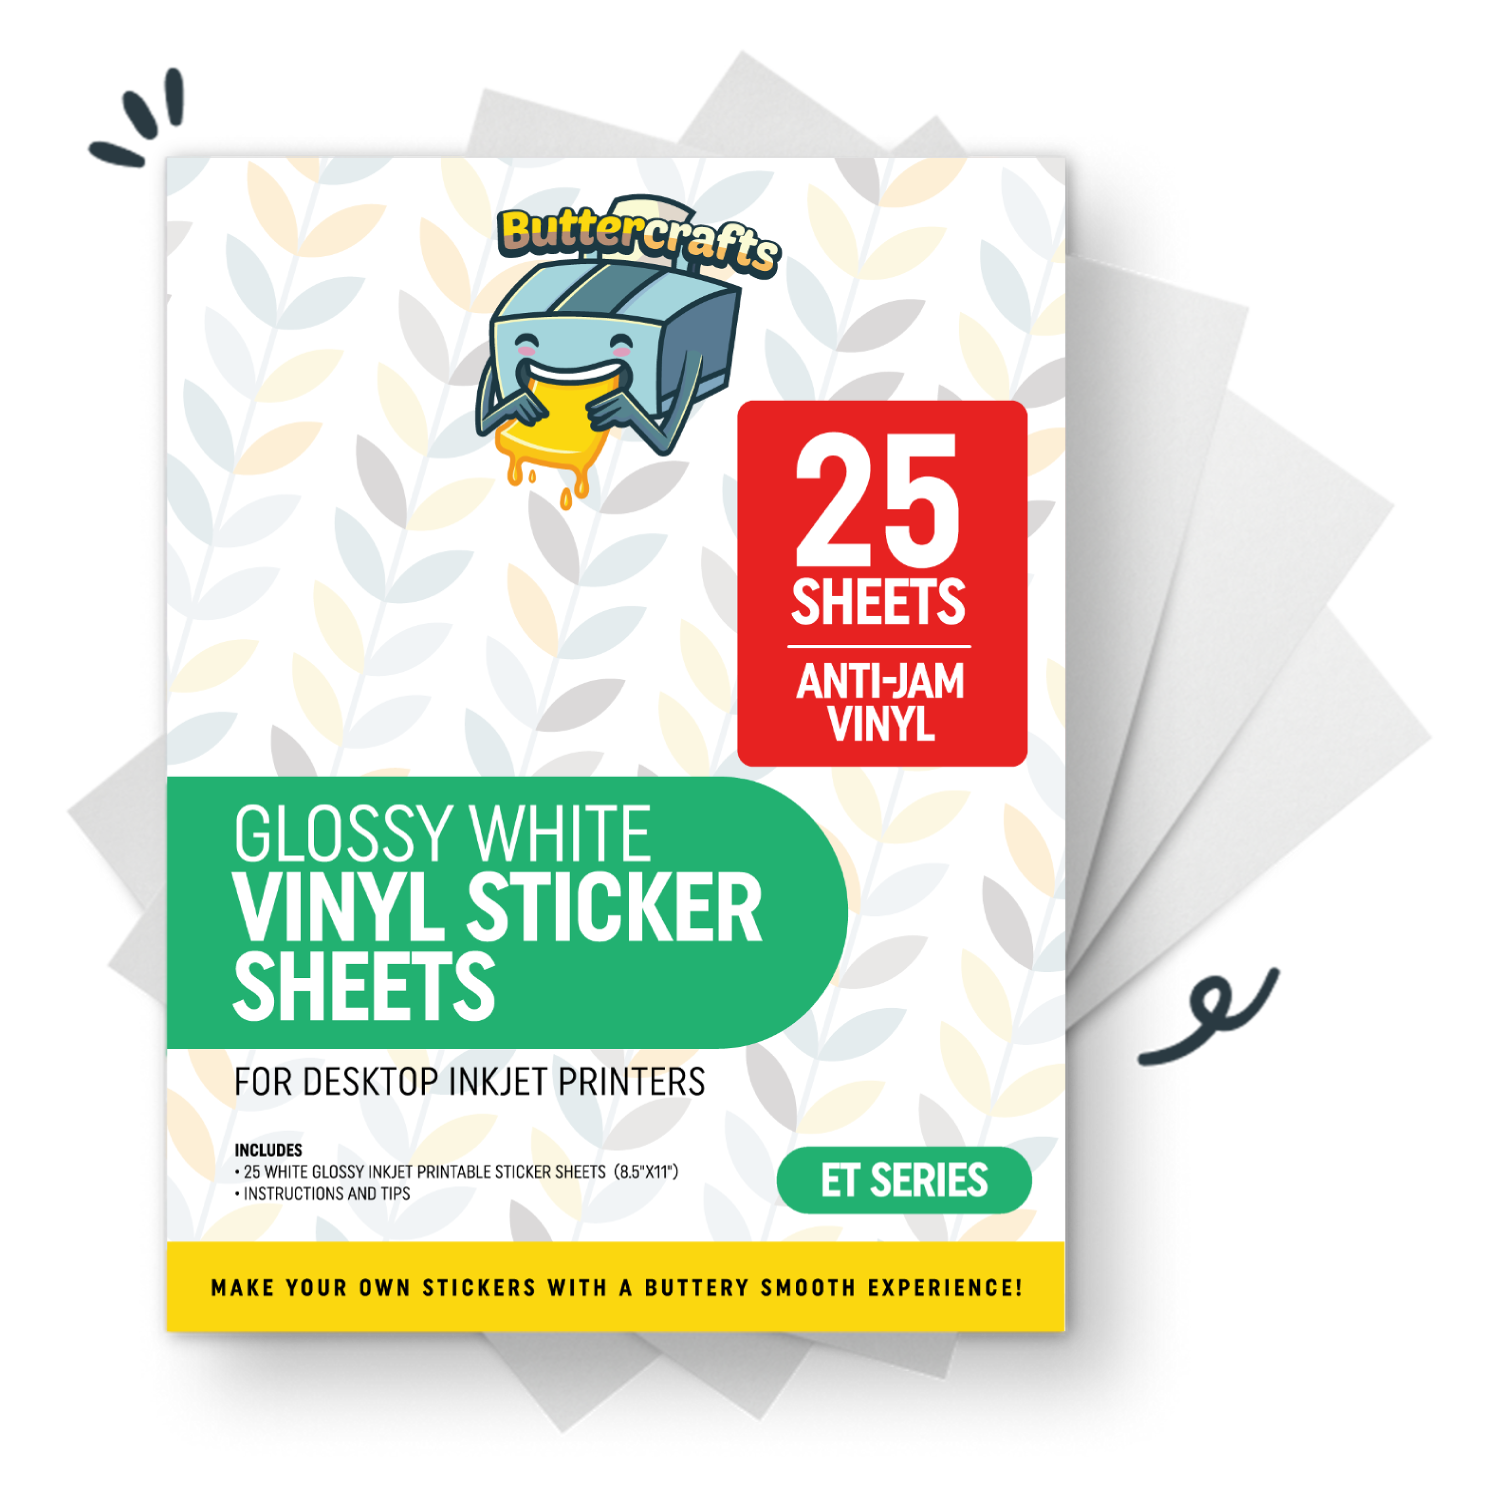 Clear Sticker Paper for Inkjet Printer - 15 Sheets (8.5 x 11) Translucent  Waterproof Printable Vinyl Sticker Paper for DIY Personalized Stickers